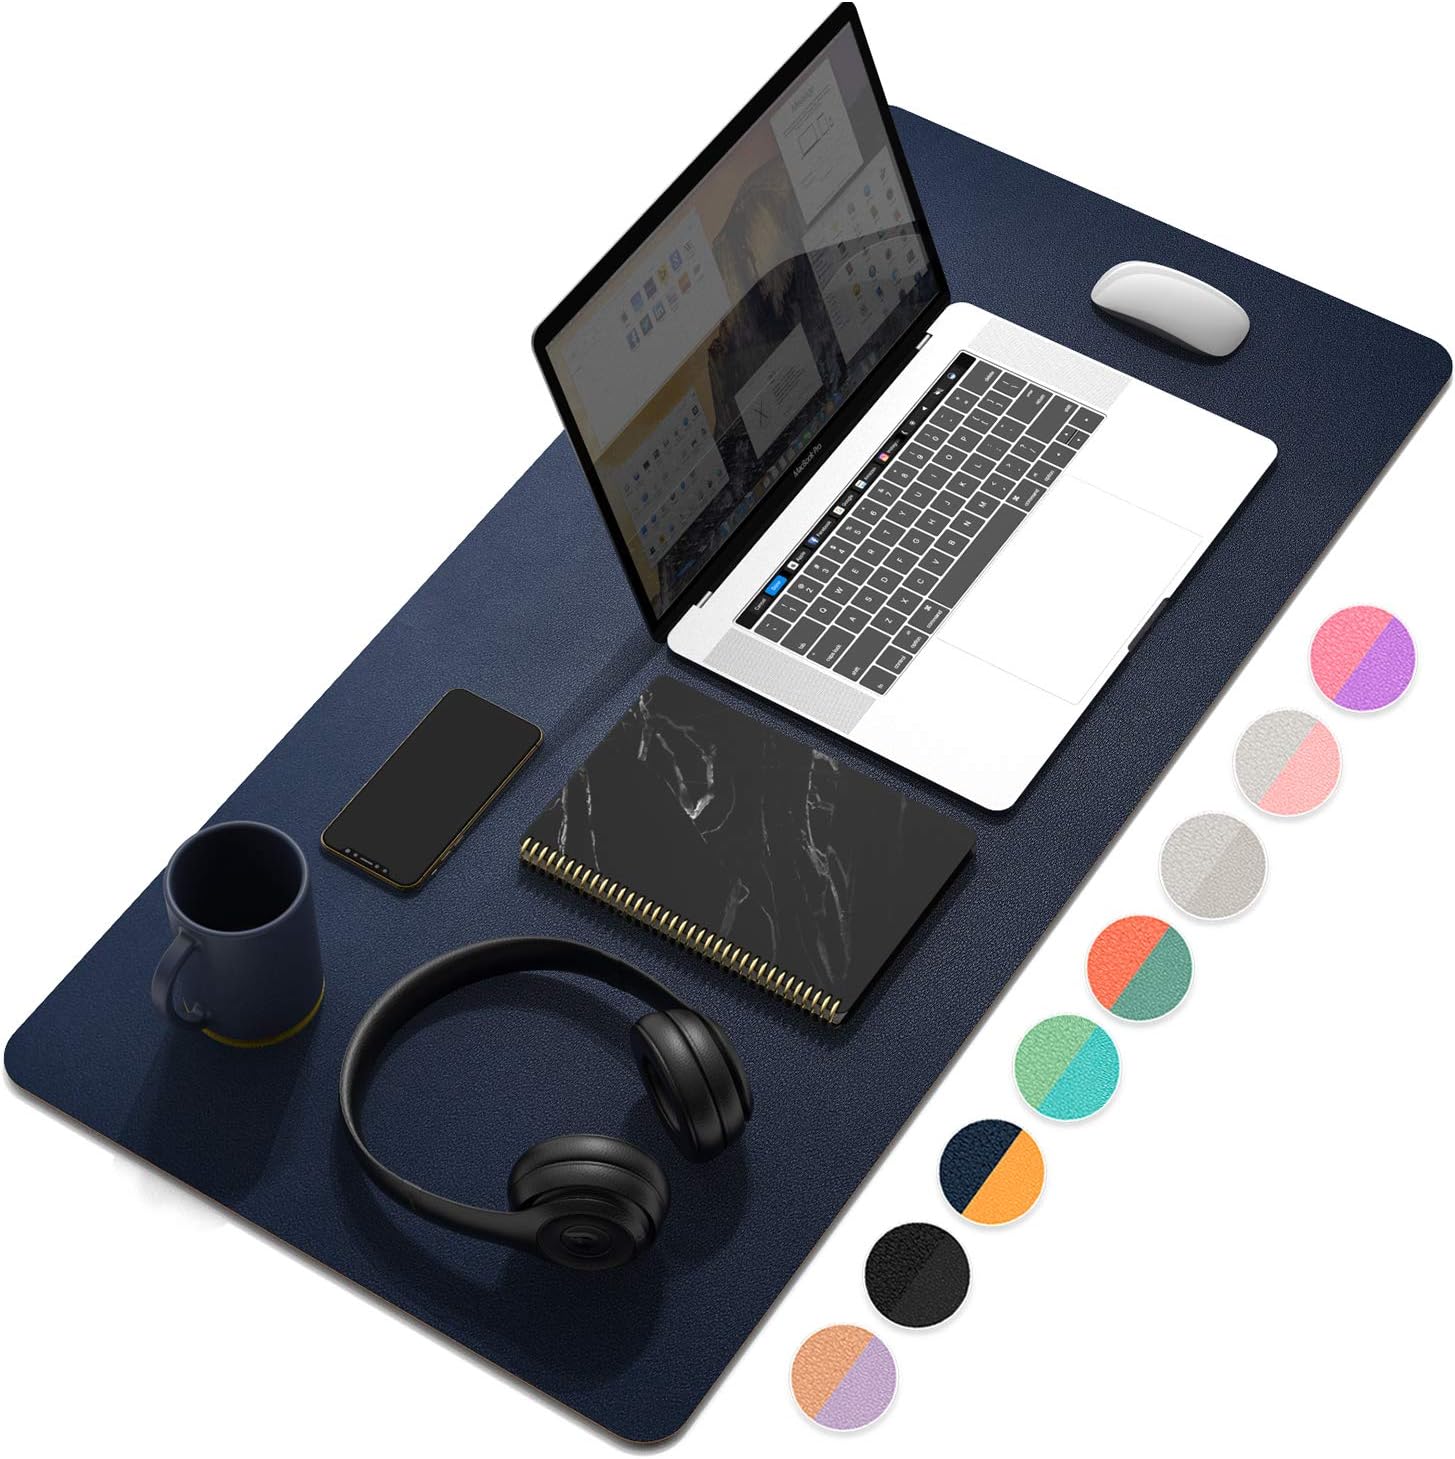 YSAGi Desk Mat, Mouse Pad,Waterproof Desk Pad,Large Mouse pad for Desk, Leather Desk Pad Large for Keyboard and Mouse,Dual-Sided Mouse Mat for Office and Home (31.5" x 15.7", Dark Tyrian Blue+Yellow)